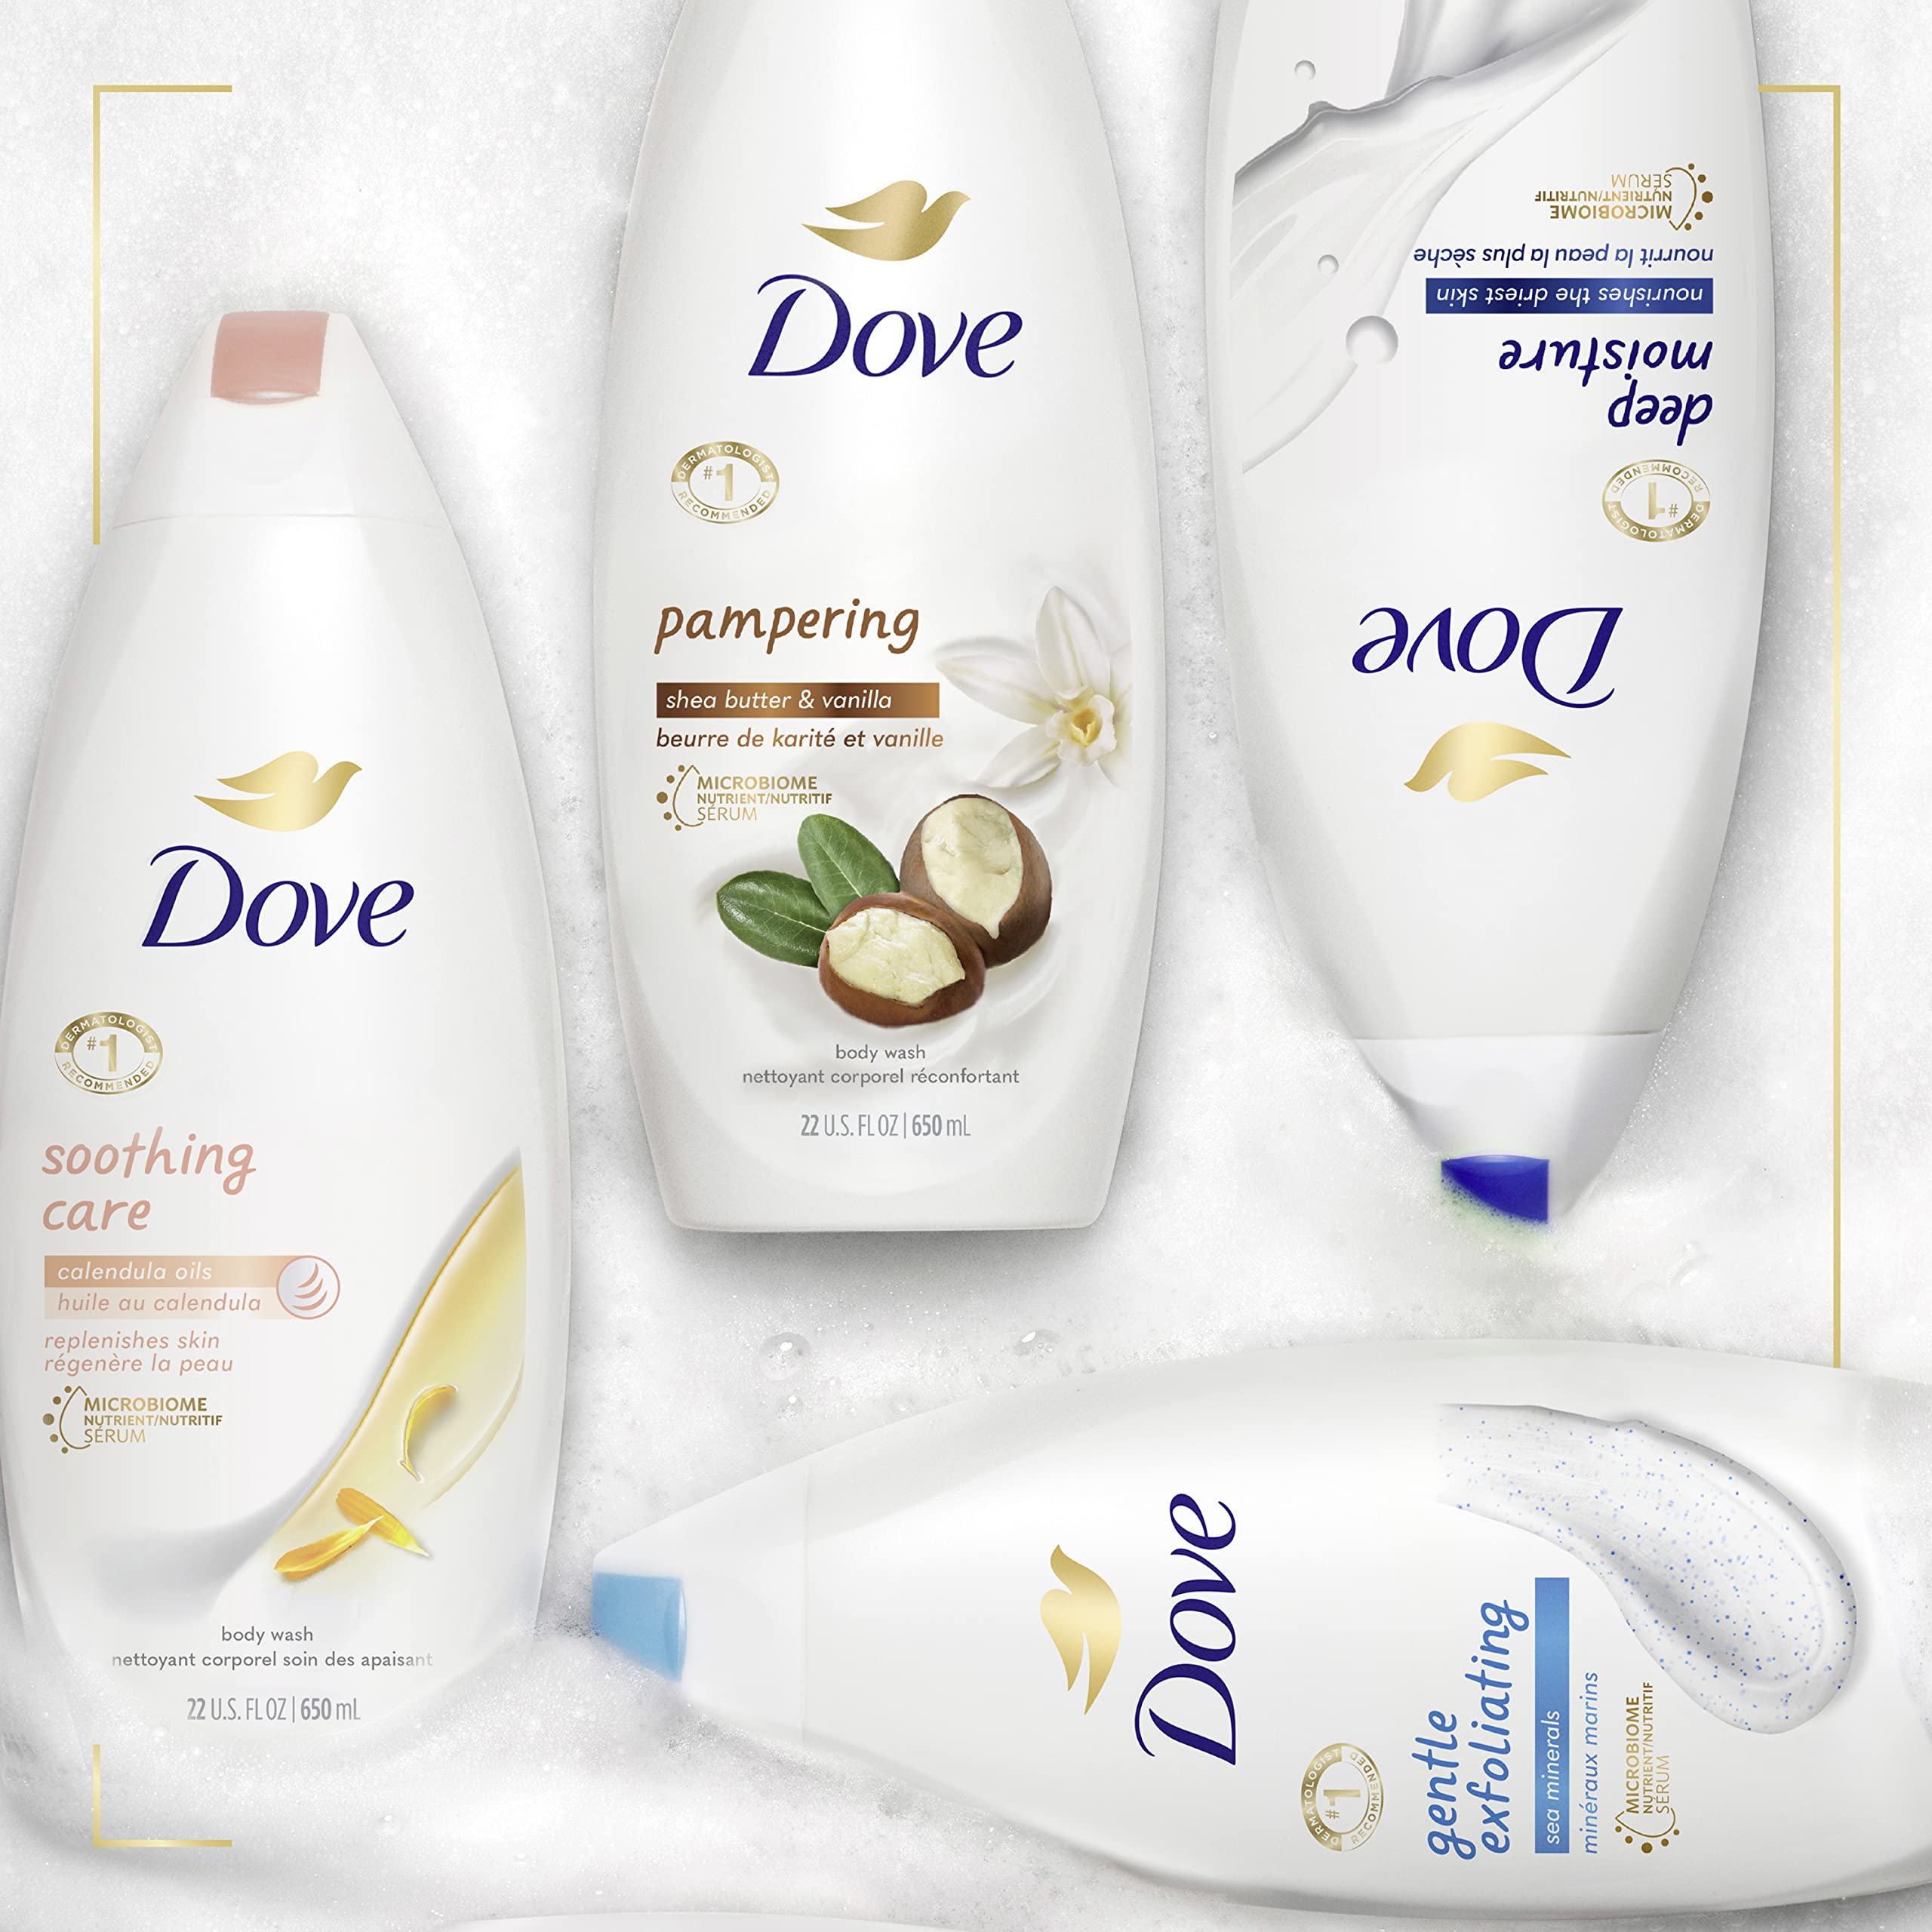 Dove Soothing Care Body Wash for Sensitive Skin with Calendula-Infused Oils Hydrates and Replenishes Skin Sulfate Free, 22 Fl Oz (Pack of 4)